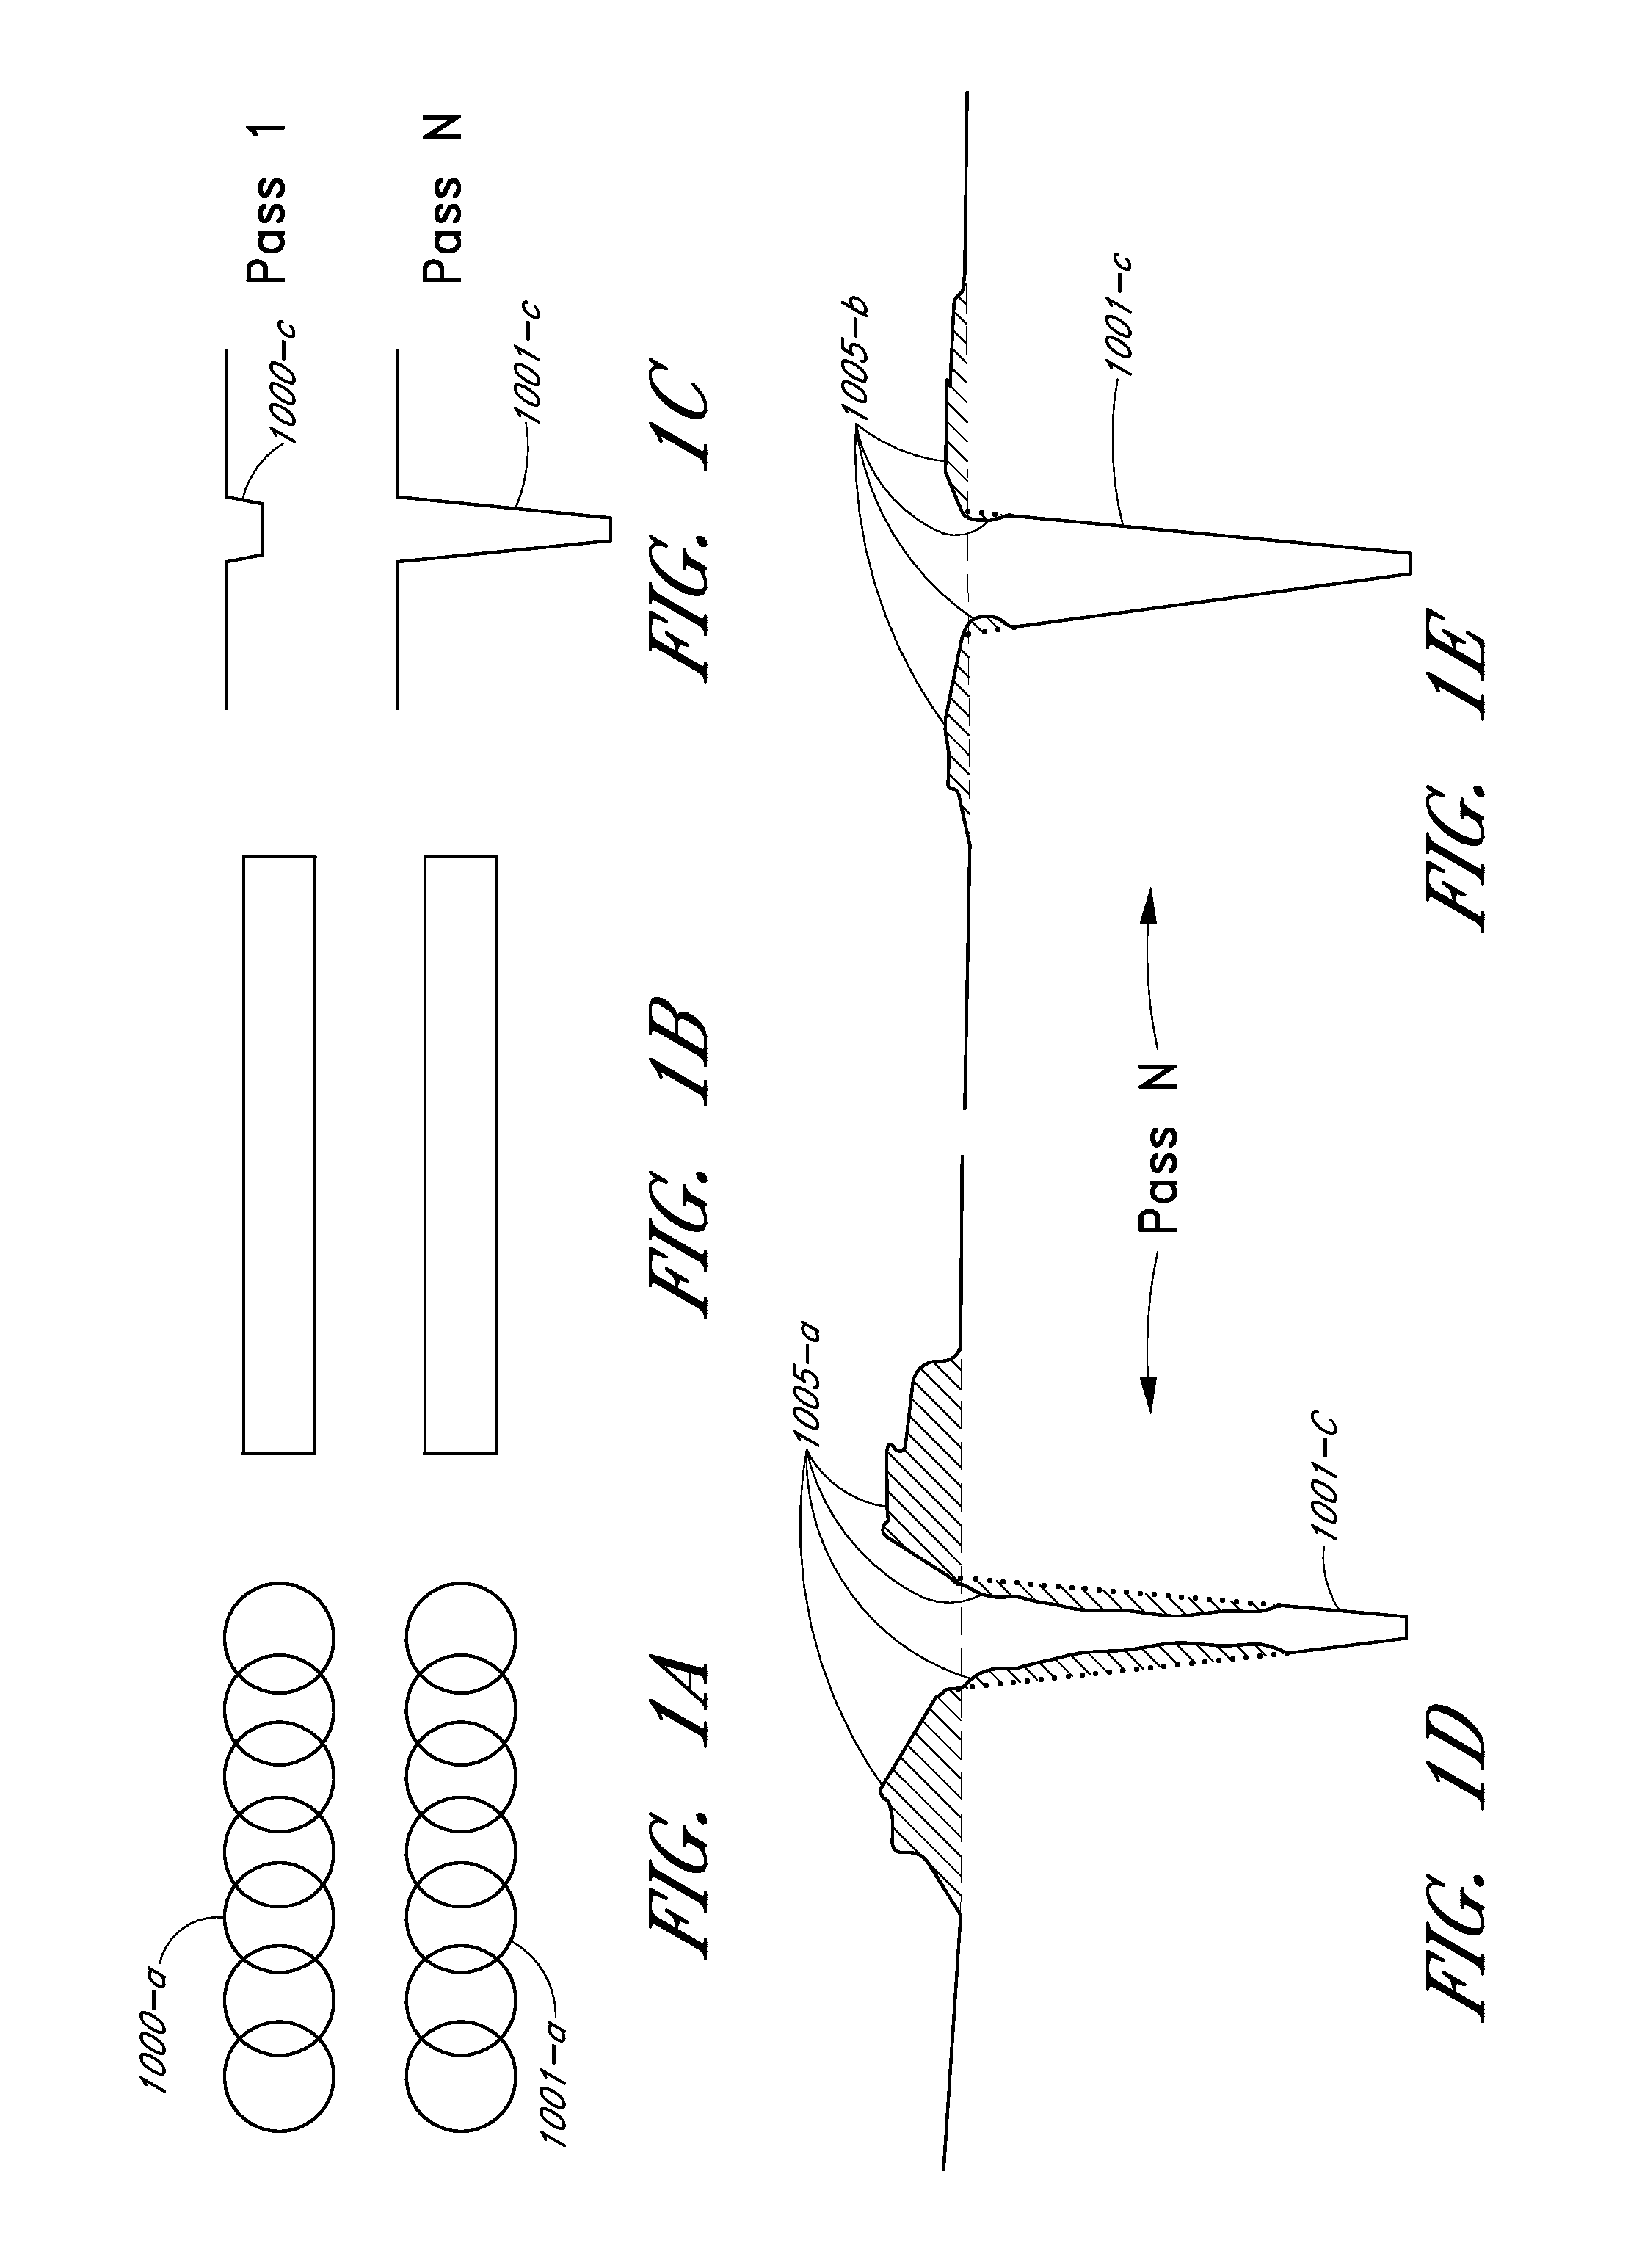 Laser-based material processing methods and systems